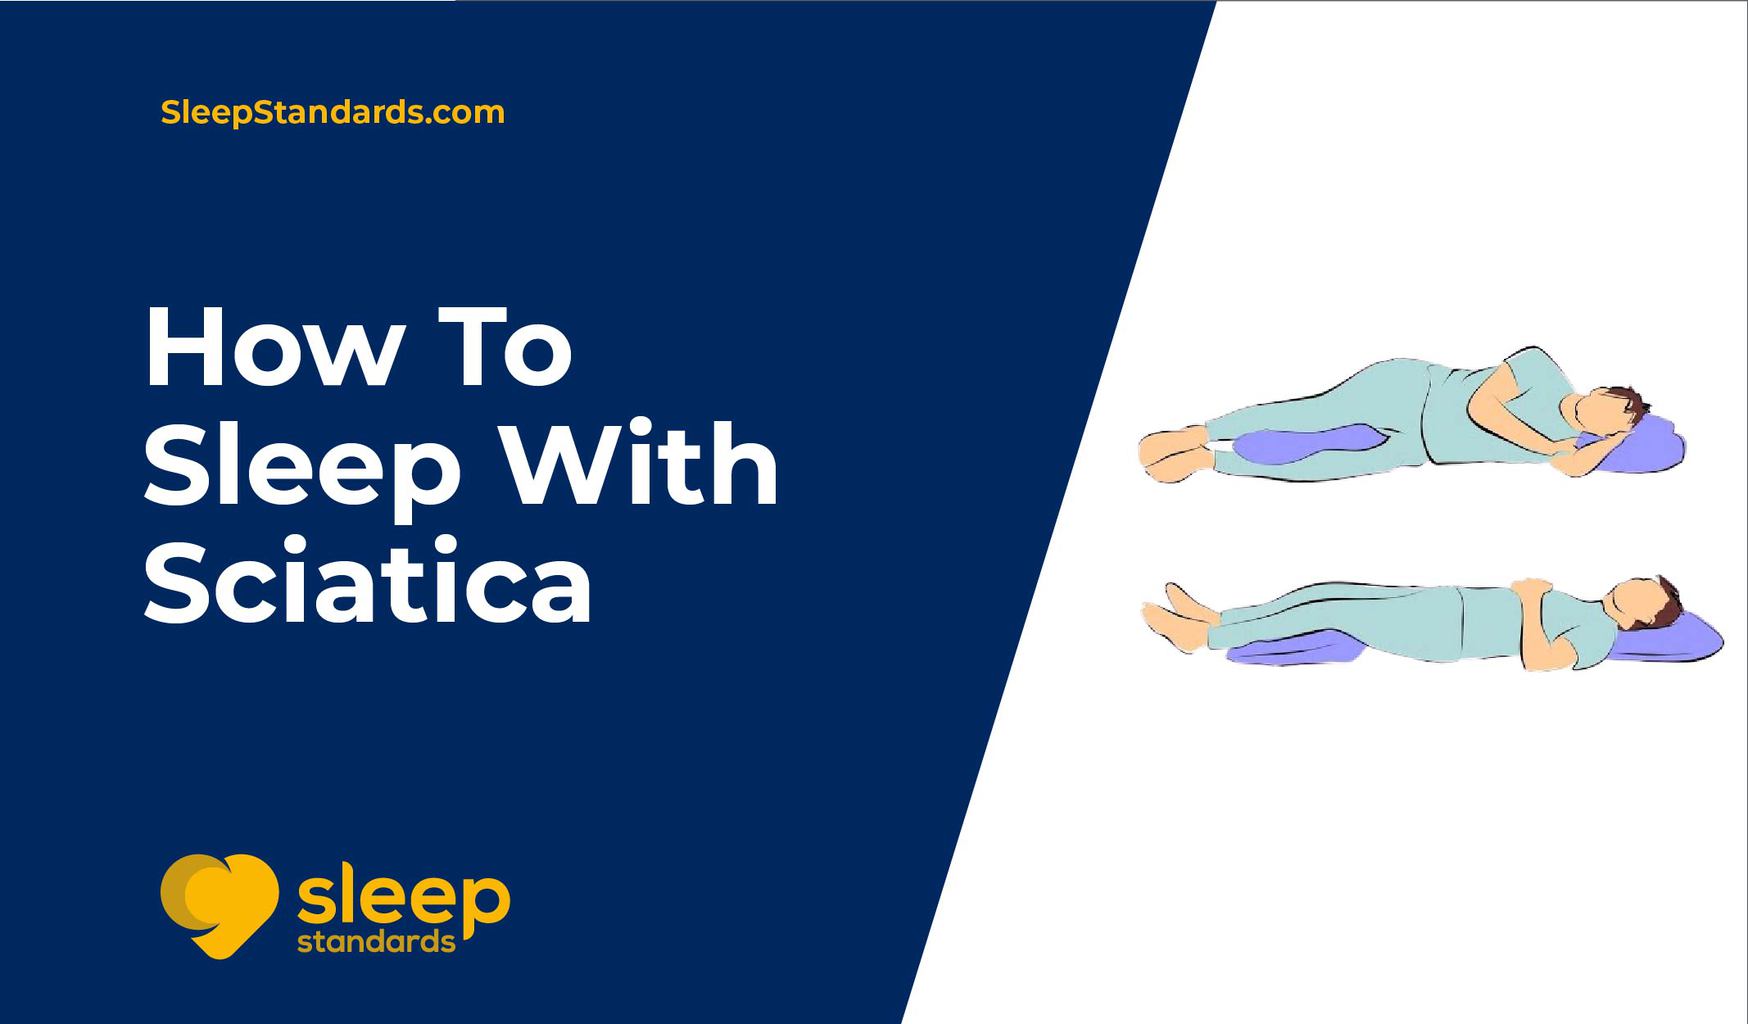 How To Sleep With Sciatica